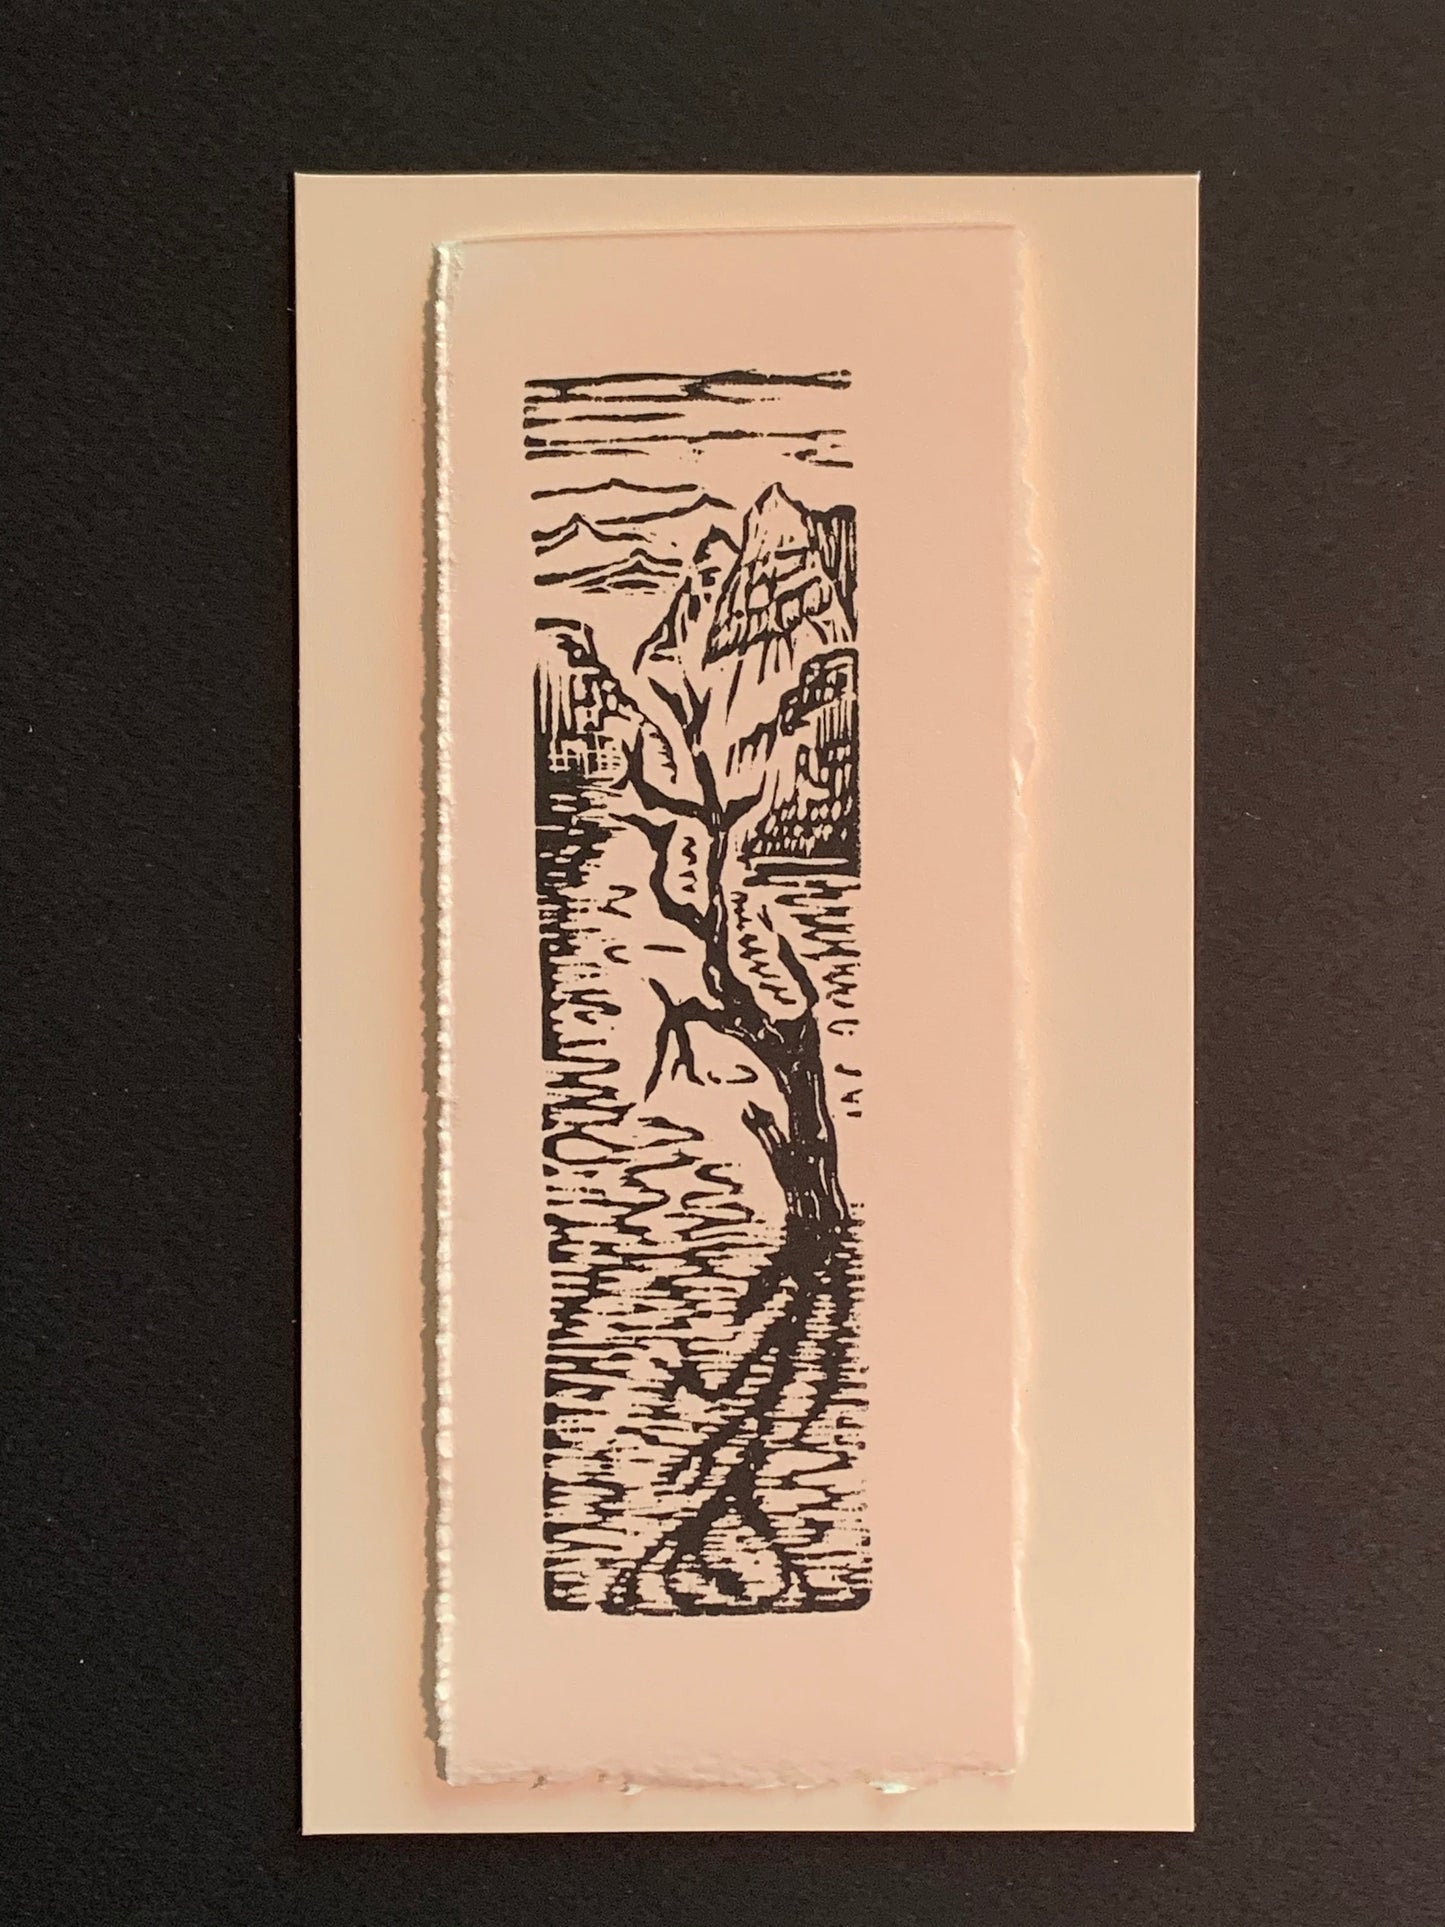 Water Tree Reflection serene lake original woodcut small print from Water in the Desert Landscape Collection